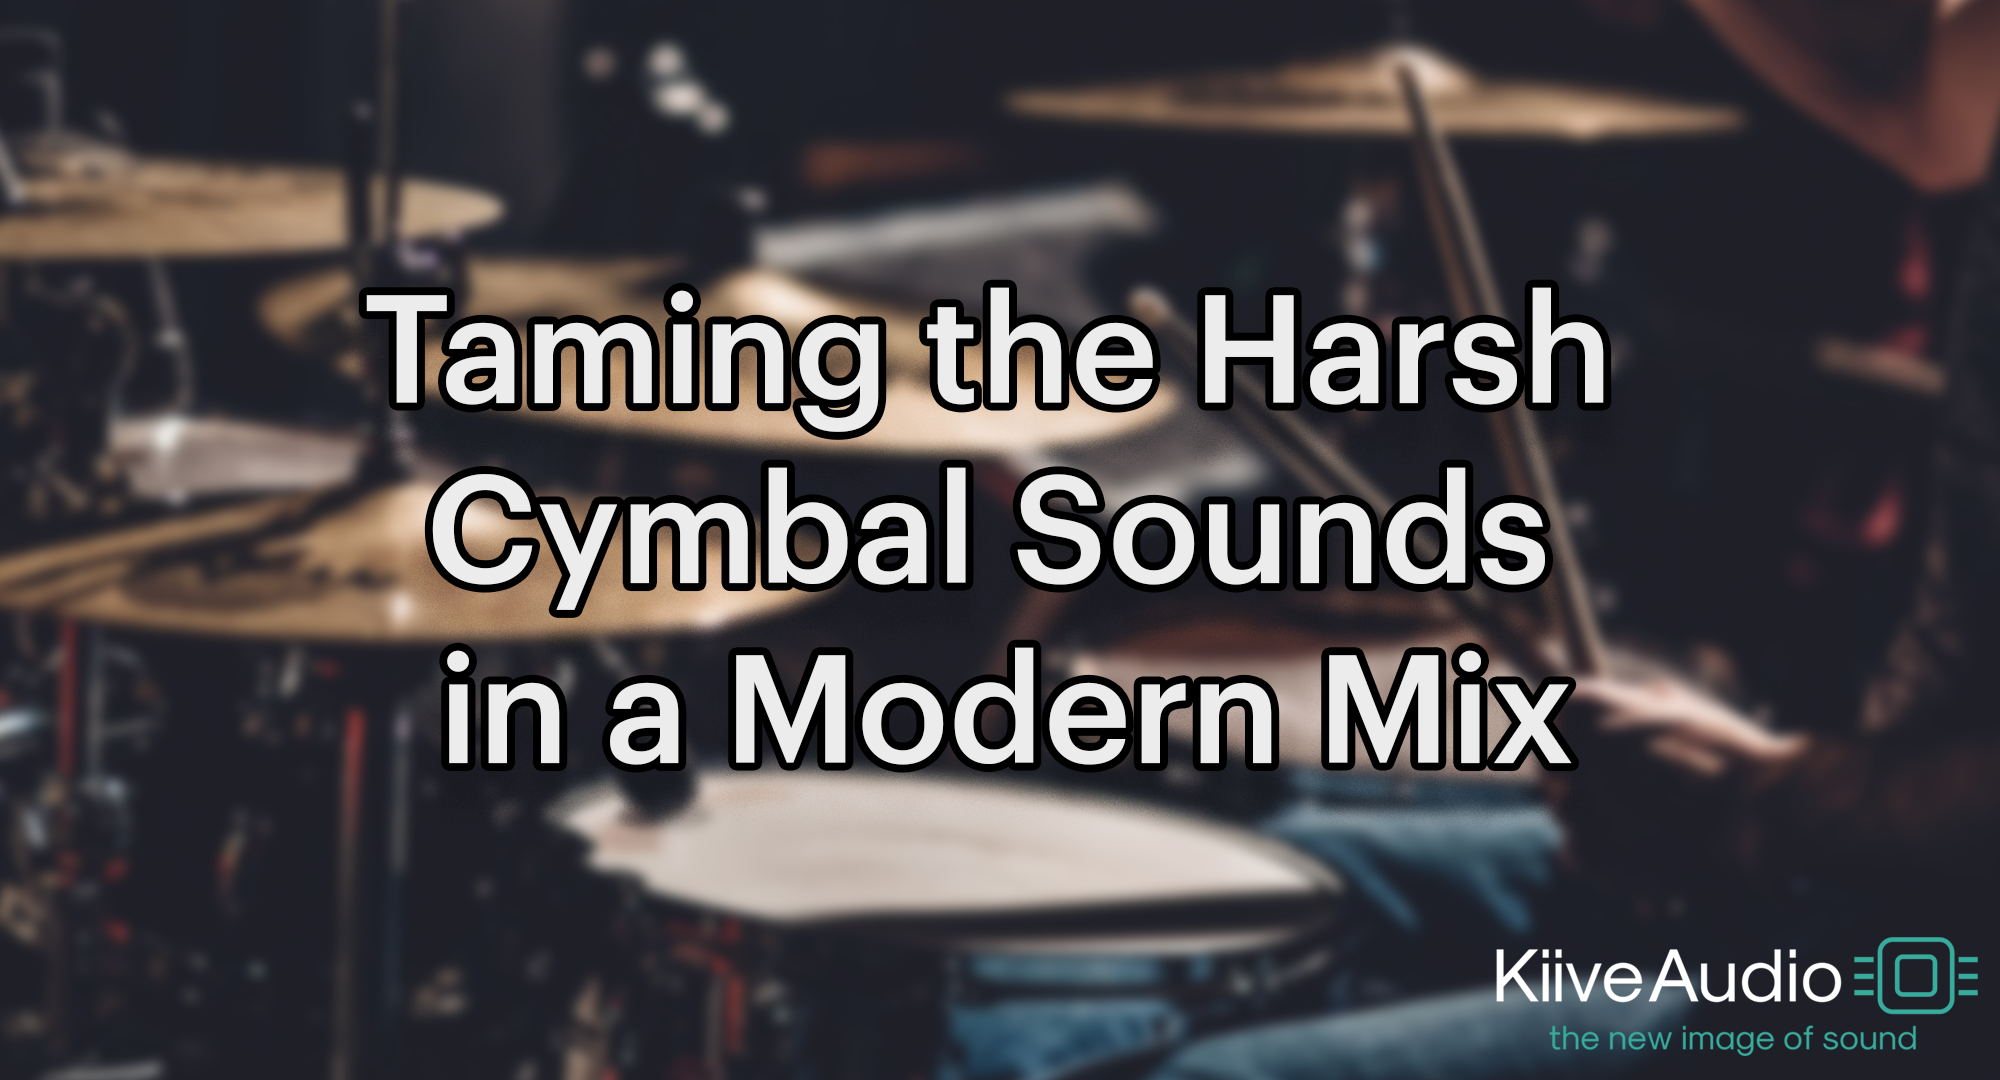 Taming the Harsh Cymbal Sounds in a Modern Mix